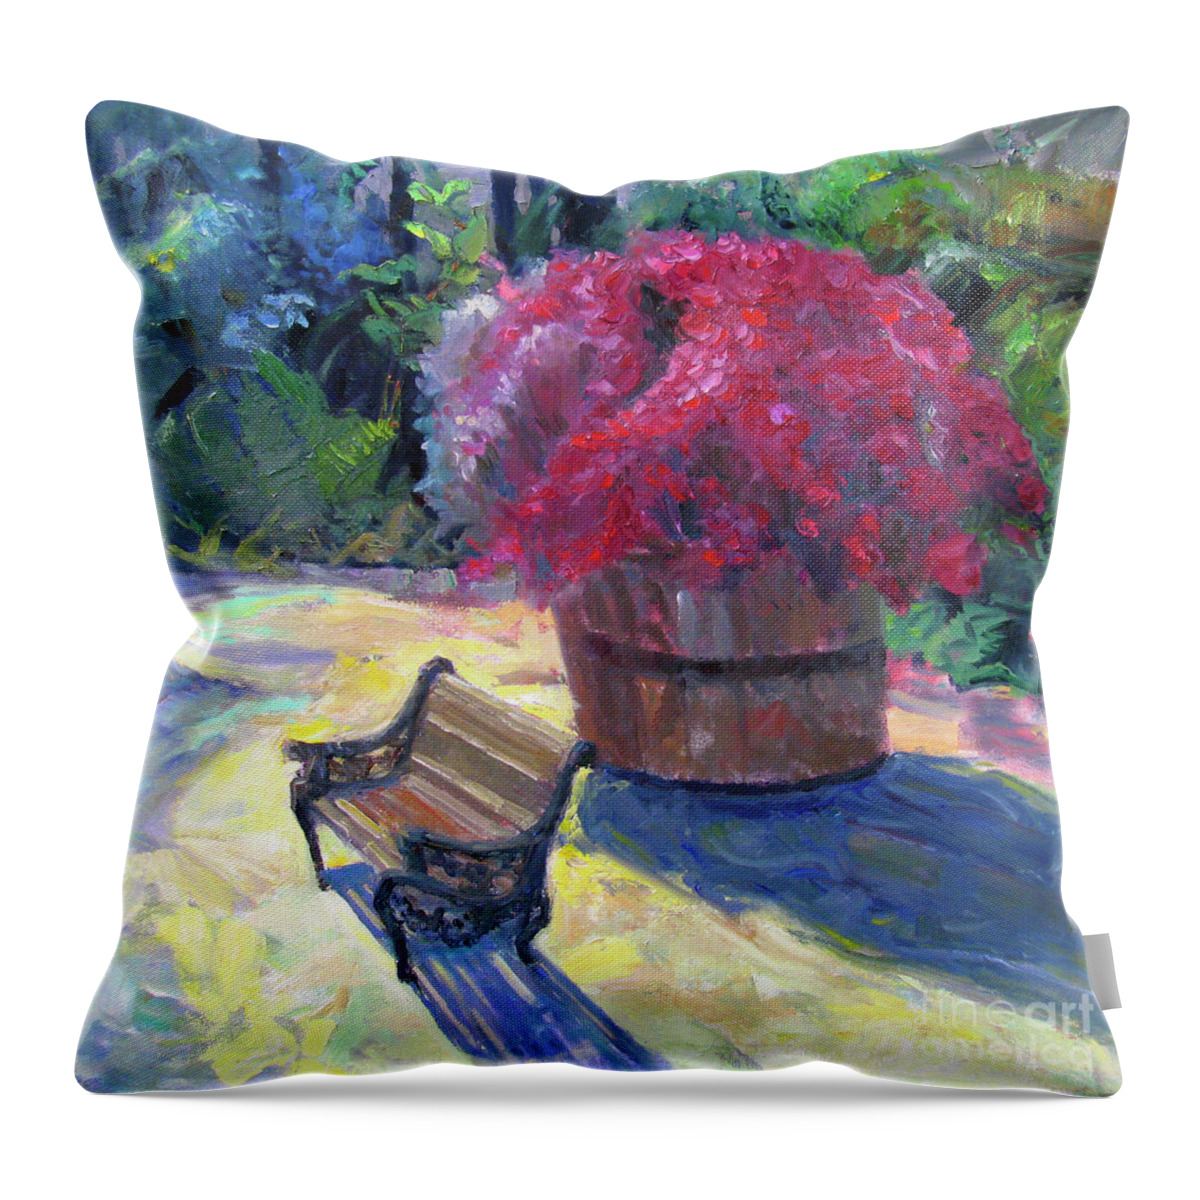 Garden Throw Pillow featuring the painting Garden of the Little People by John McCormick